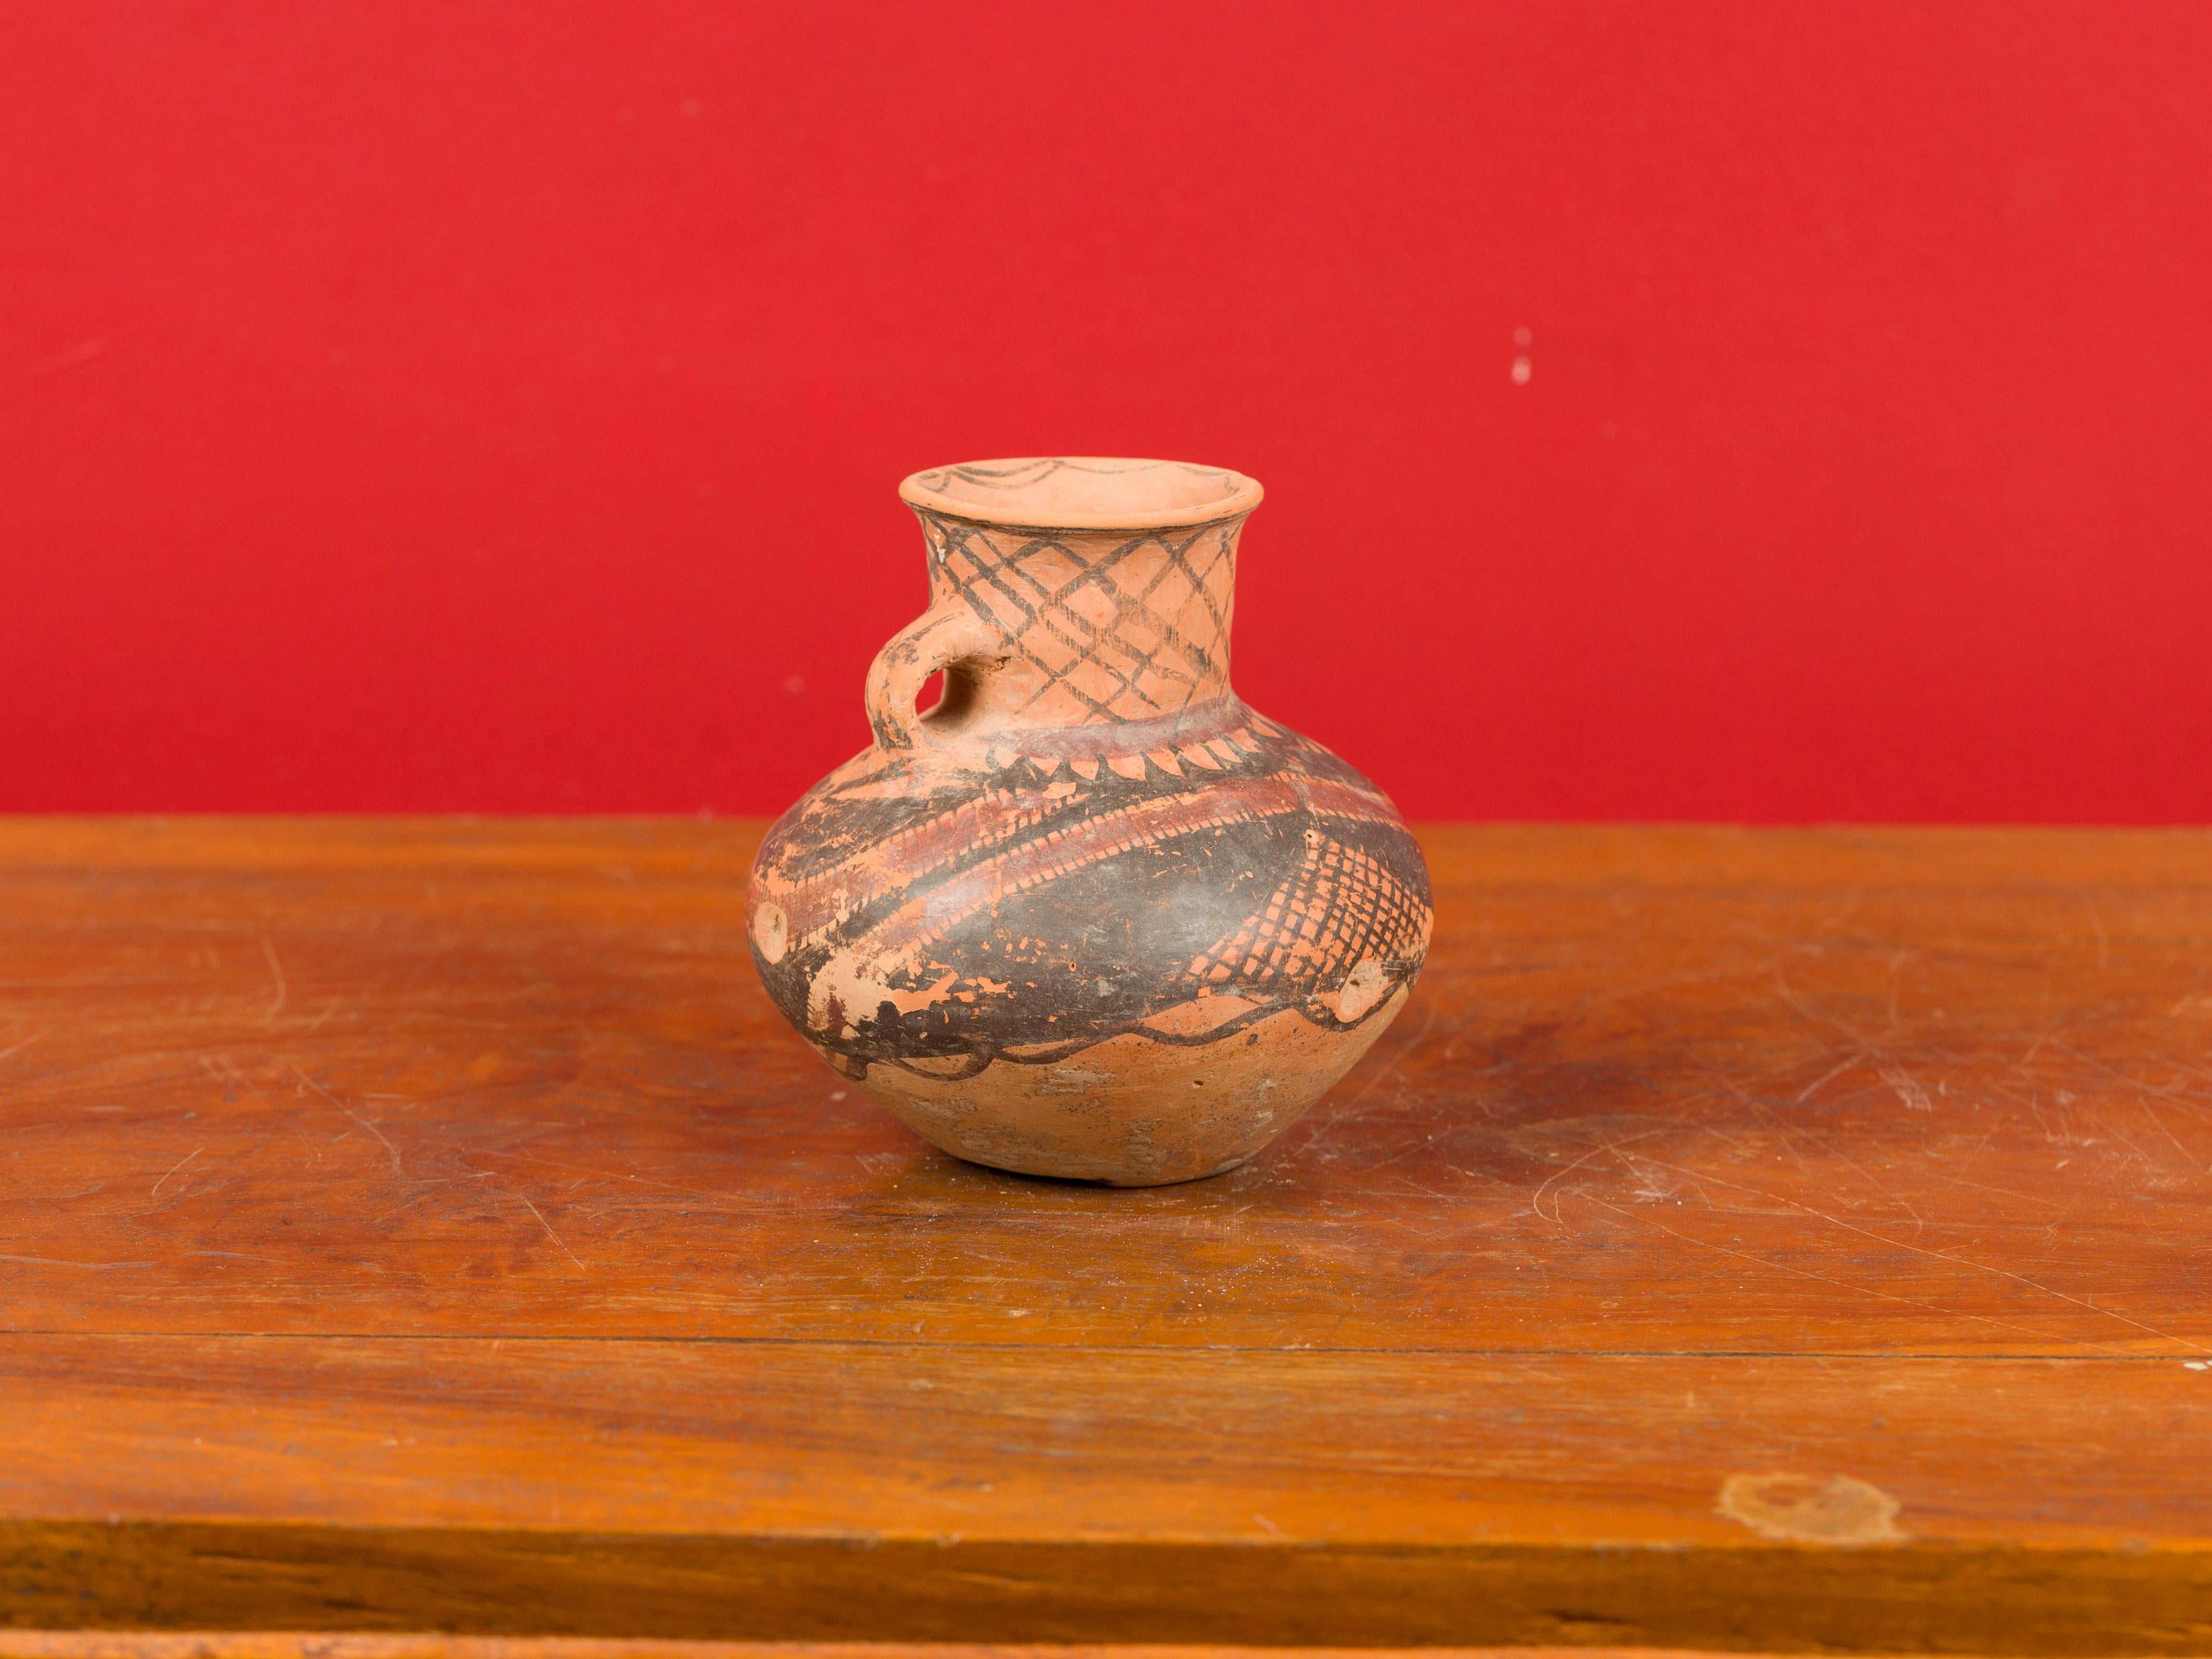 A Chinese Neolithic terracotta pottery from 4000-3000 BC, with single lateral handle and red and black painted geometric decor. Born in China during the Neolithic period, this pitcher attracts our attention with its nice patina, simple lines and